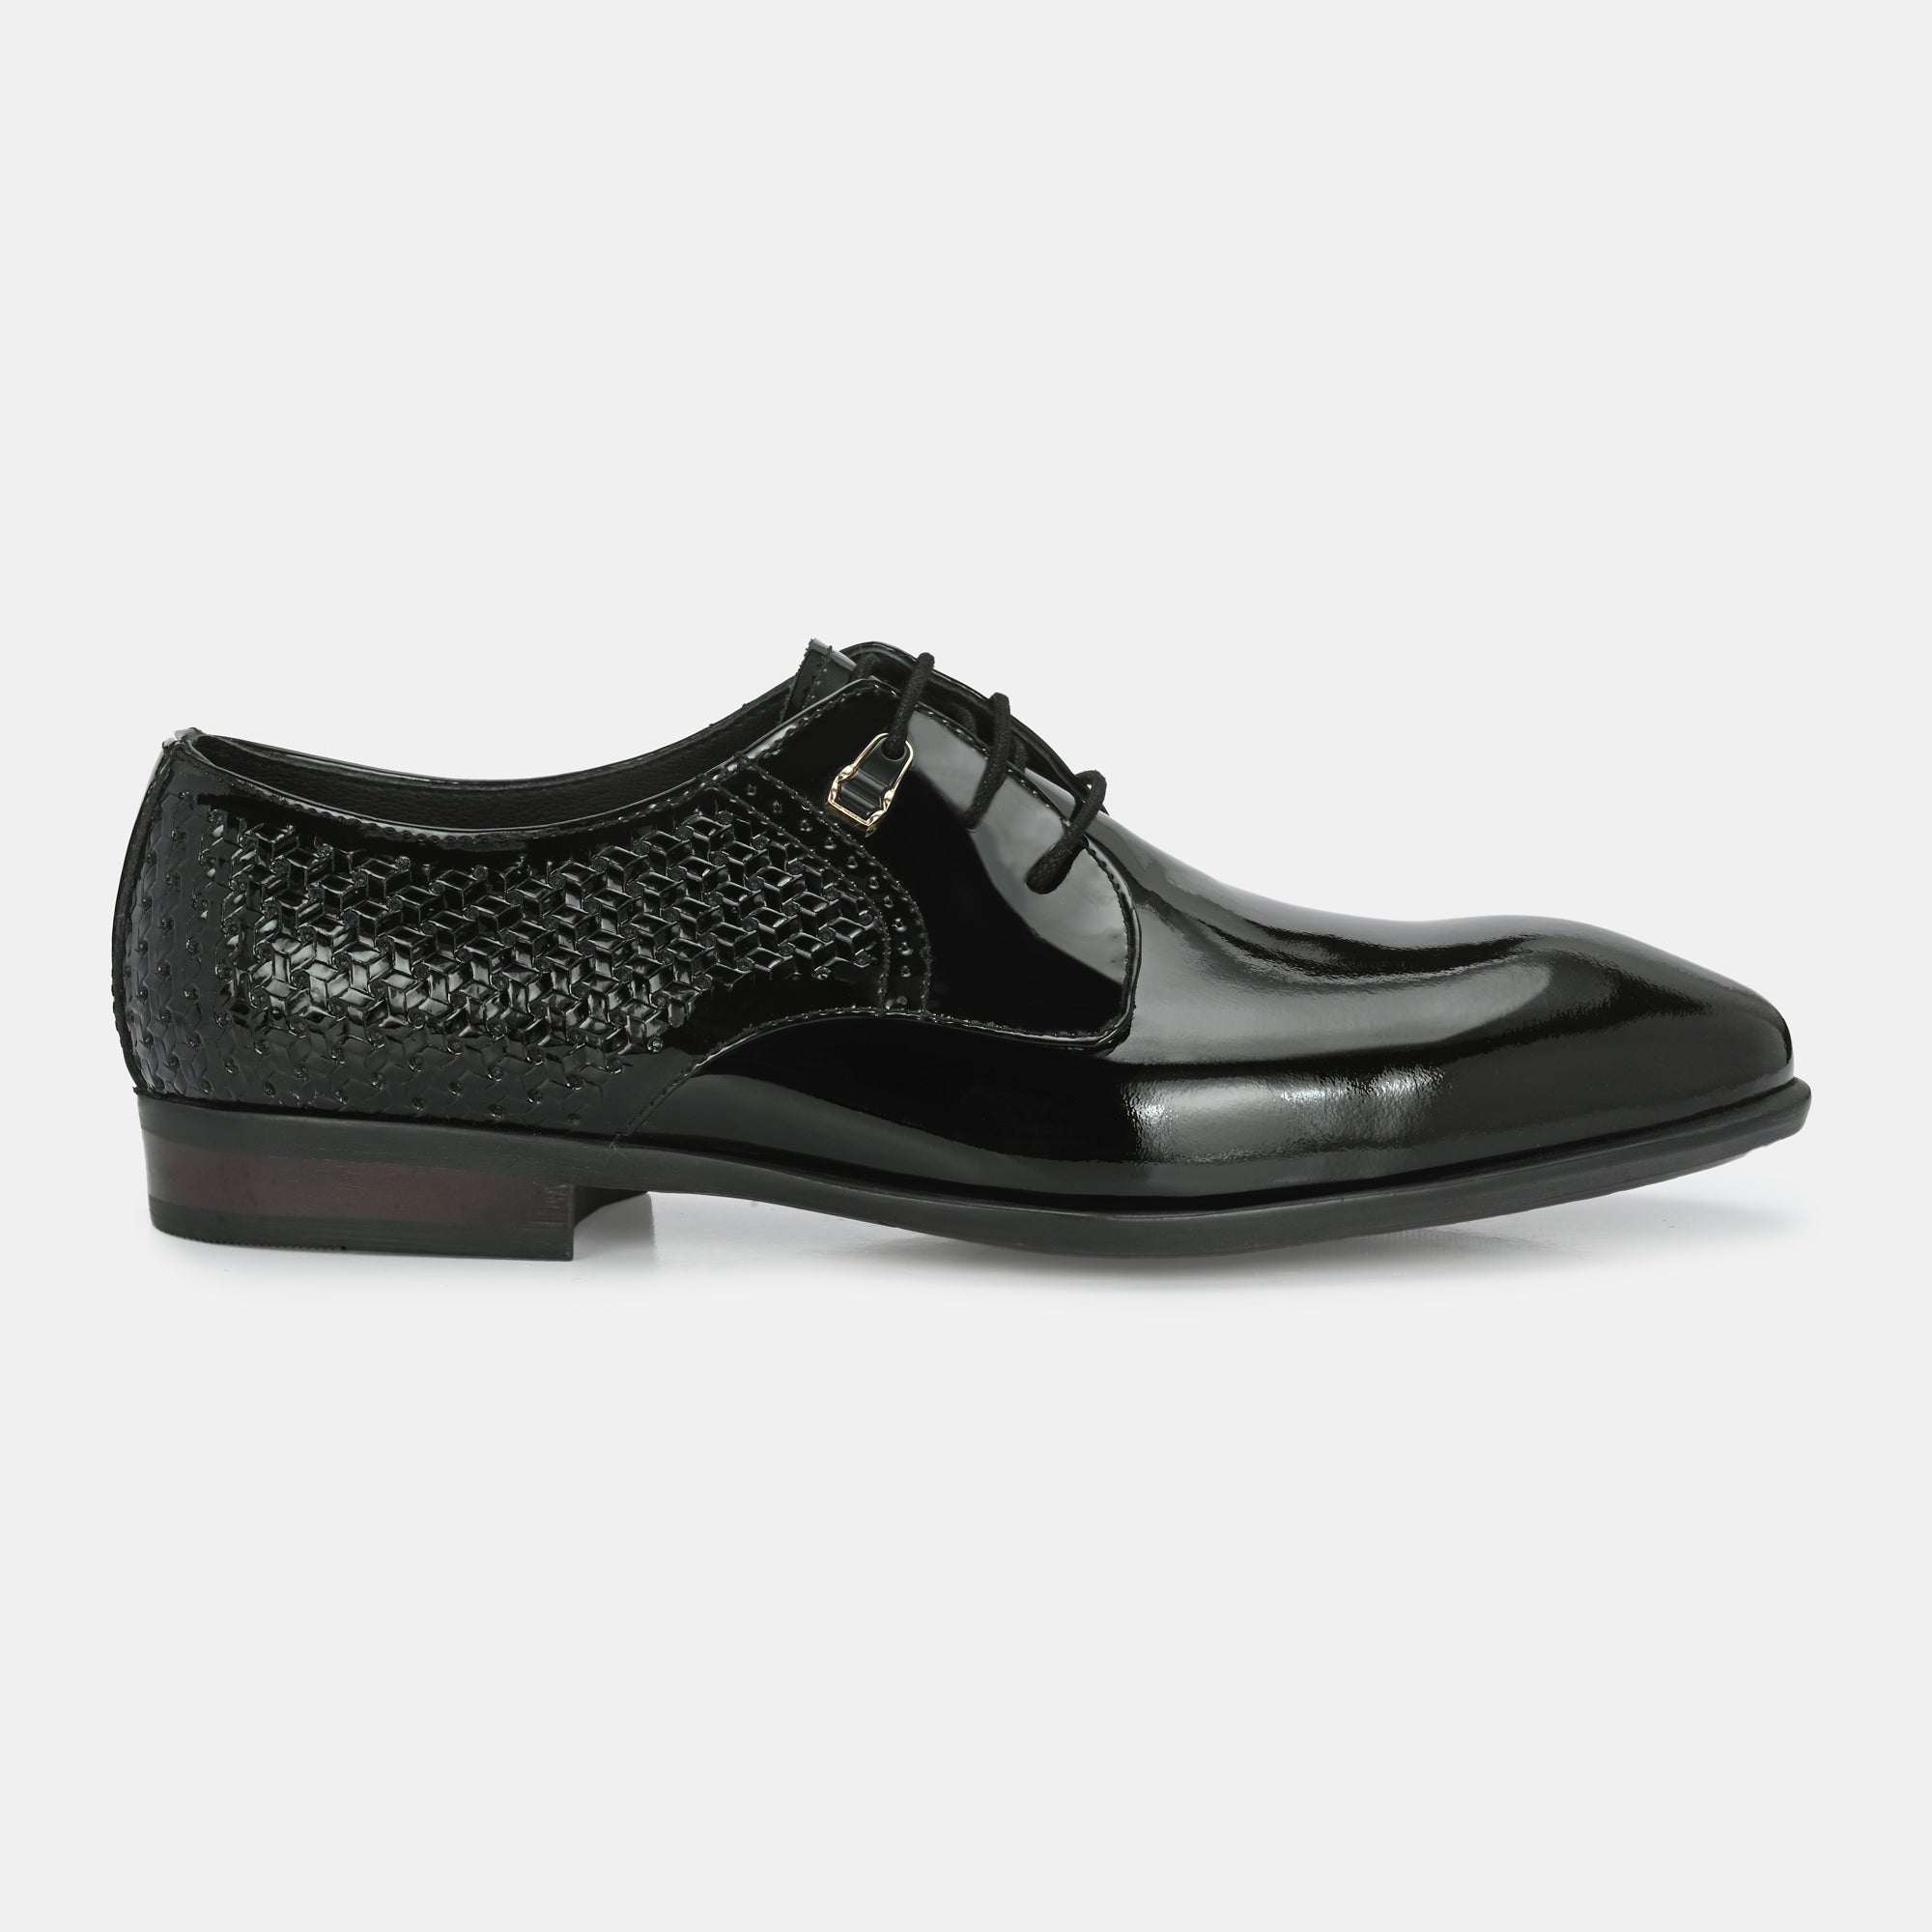 Buy Imperio Men Black Solid Patent Leather Formal Slip-On Shoes Online